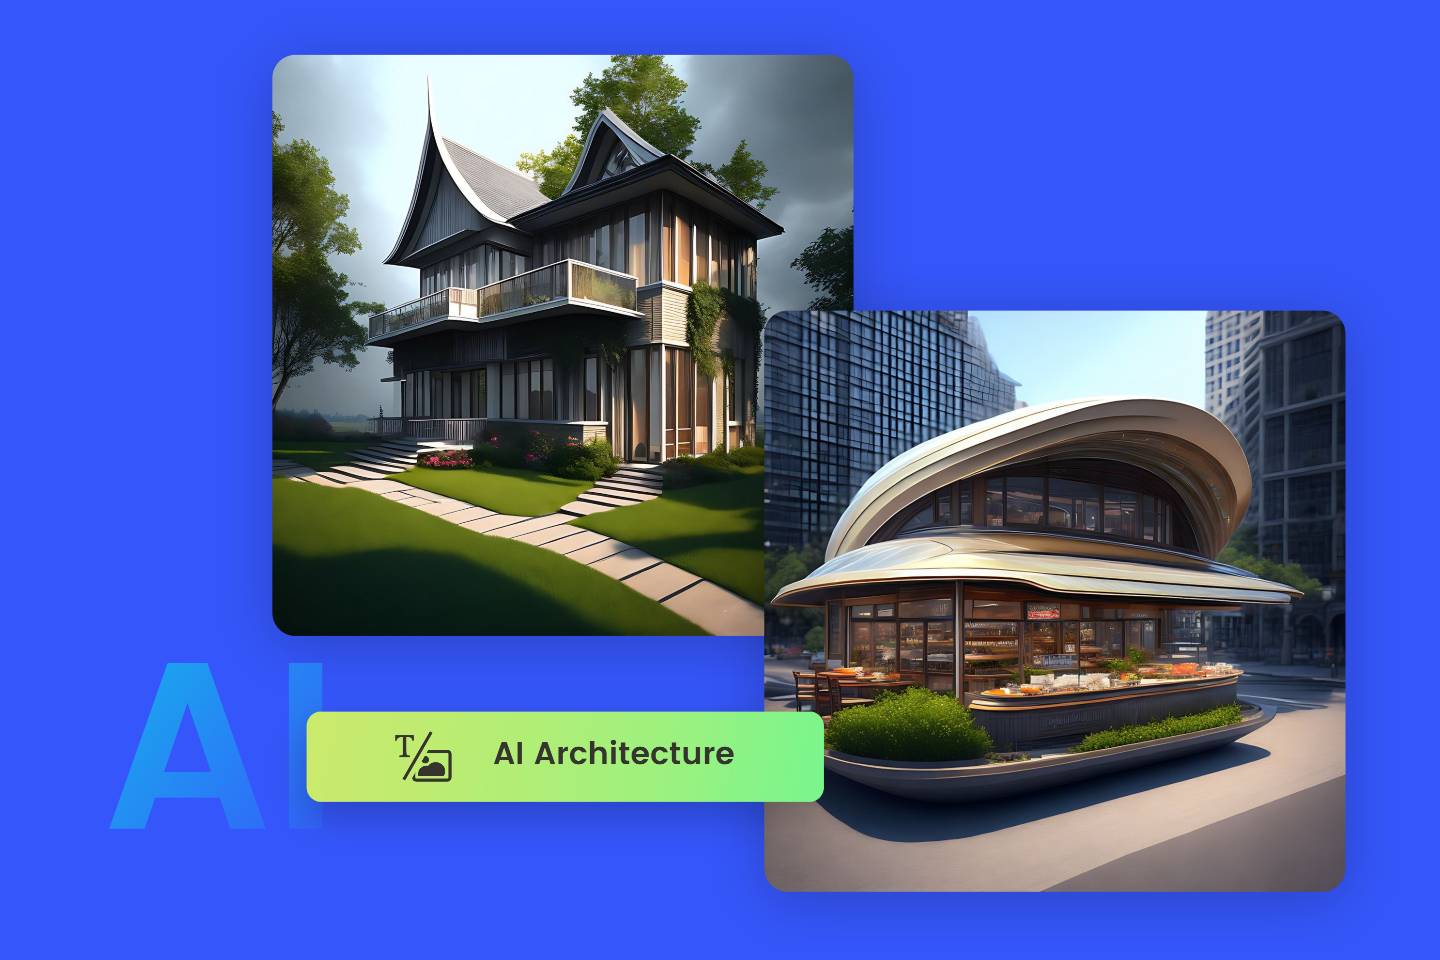 Two modern AI Architecture designs made by ai architecture generator